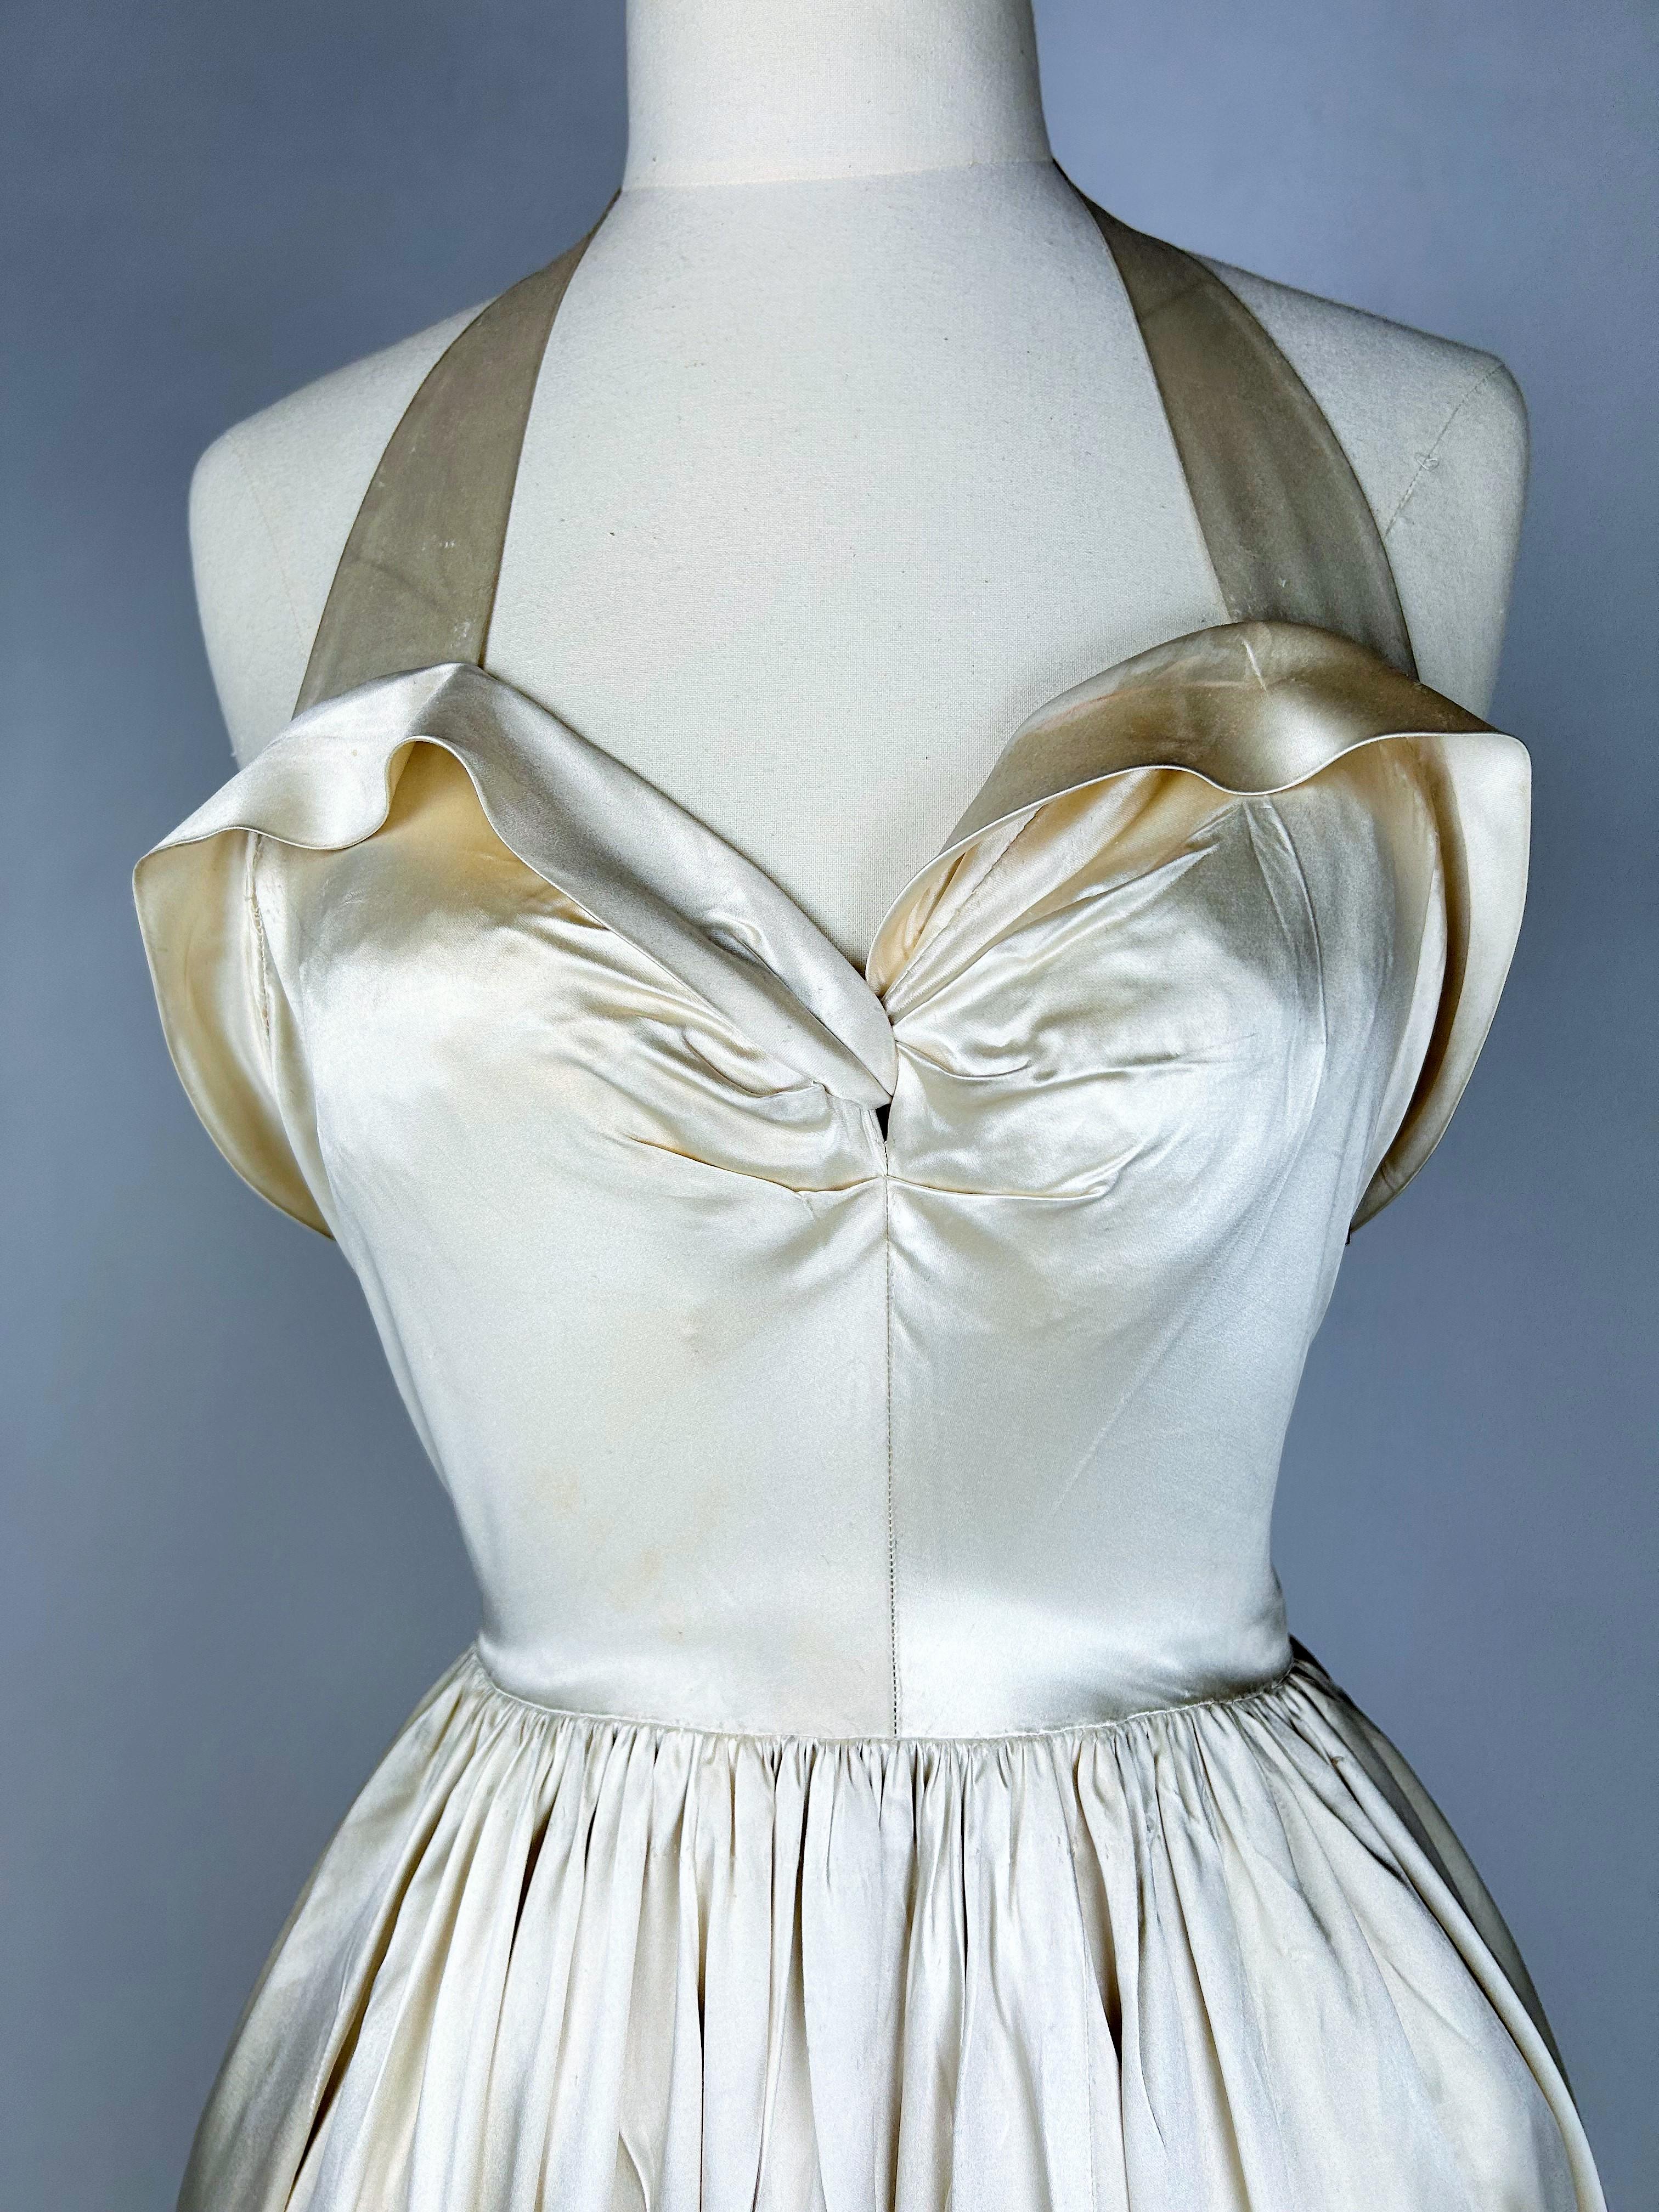 Circa 1940-1944

France haute Couture

Majestic grand soir dress in Duchesse Champagne satin by Lucien Lelong, 16 Avenue Matignon Paris and numbered 53368. Dress with large balconned neckline, held in place by a neck loop, side zipper.  Sun skirt